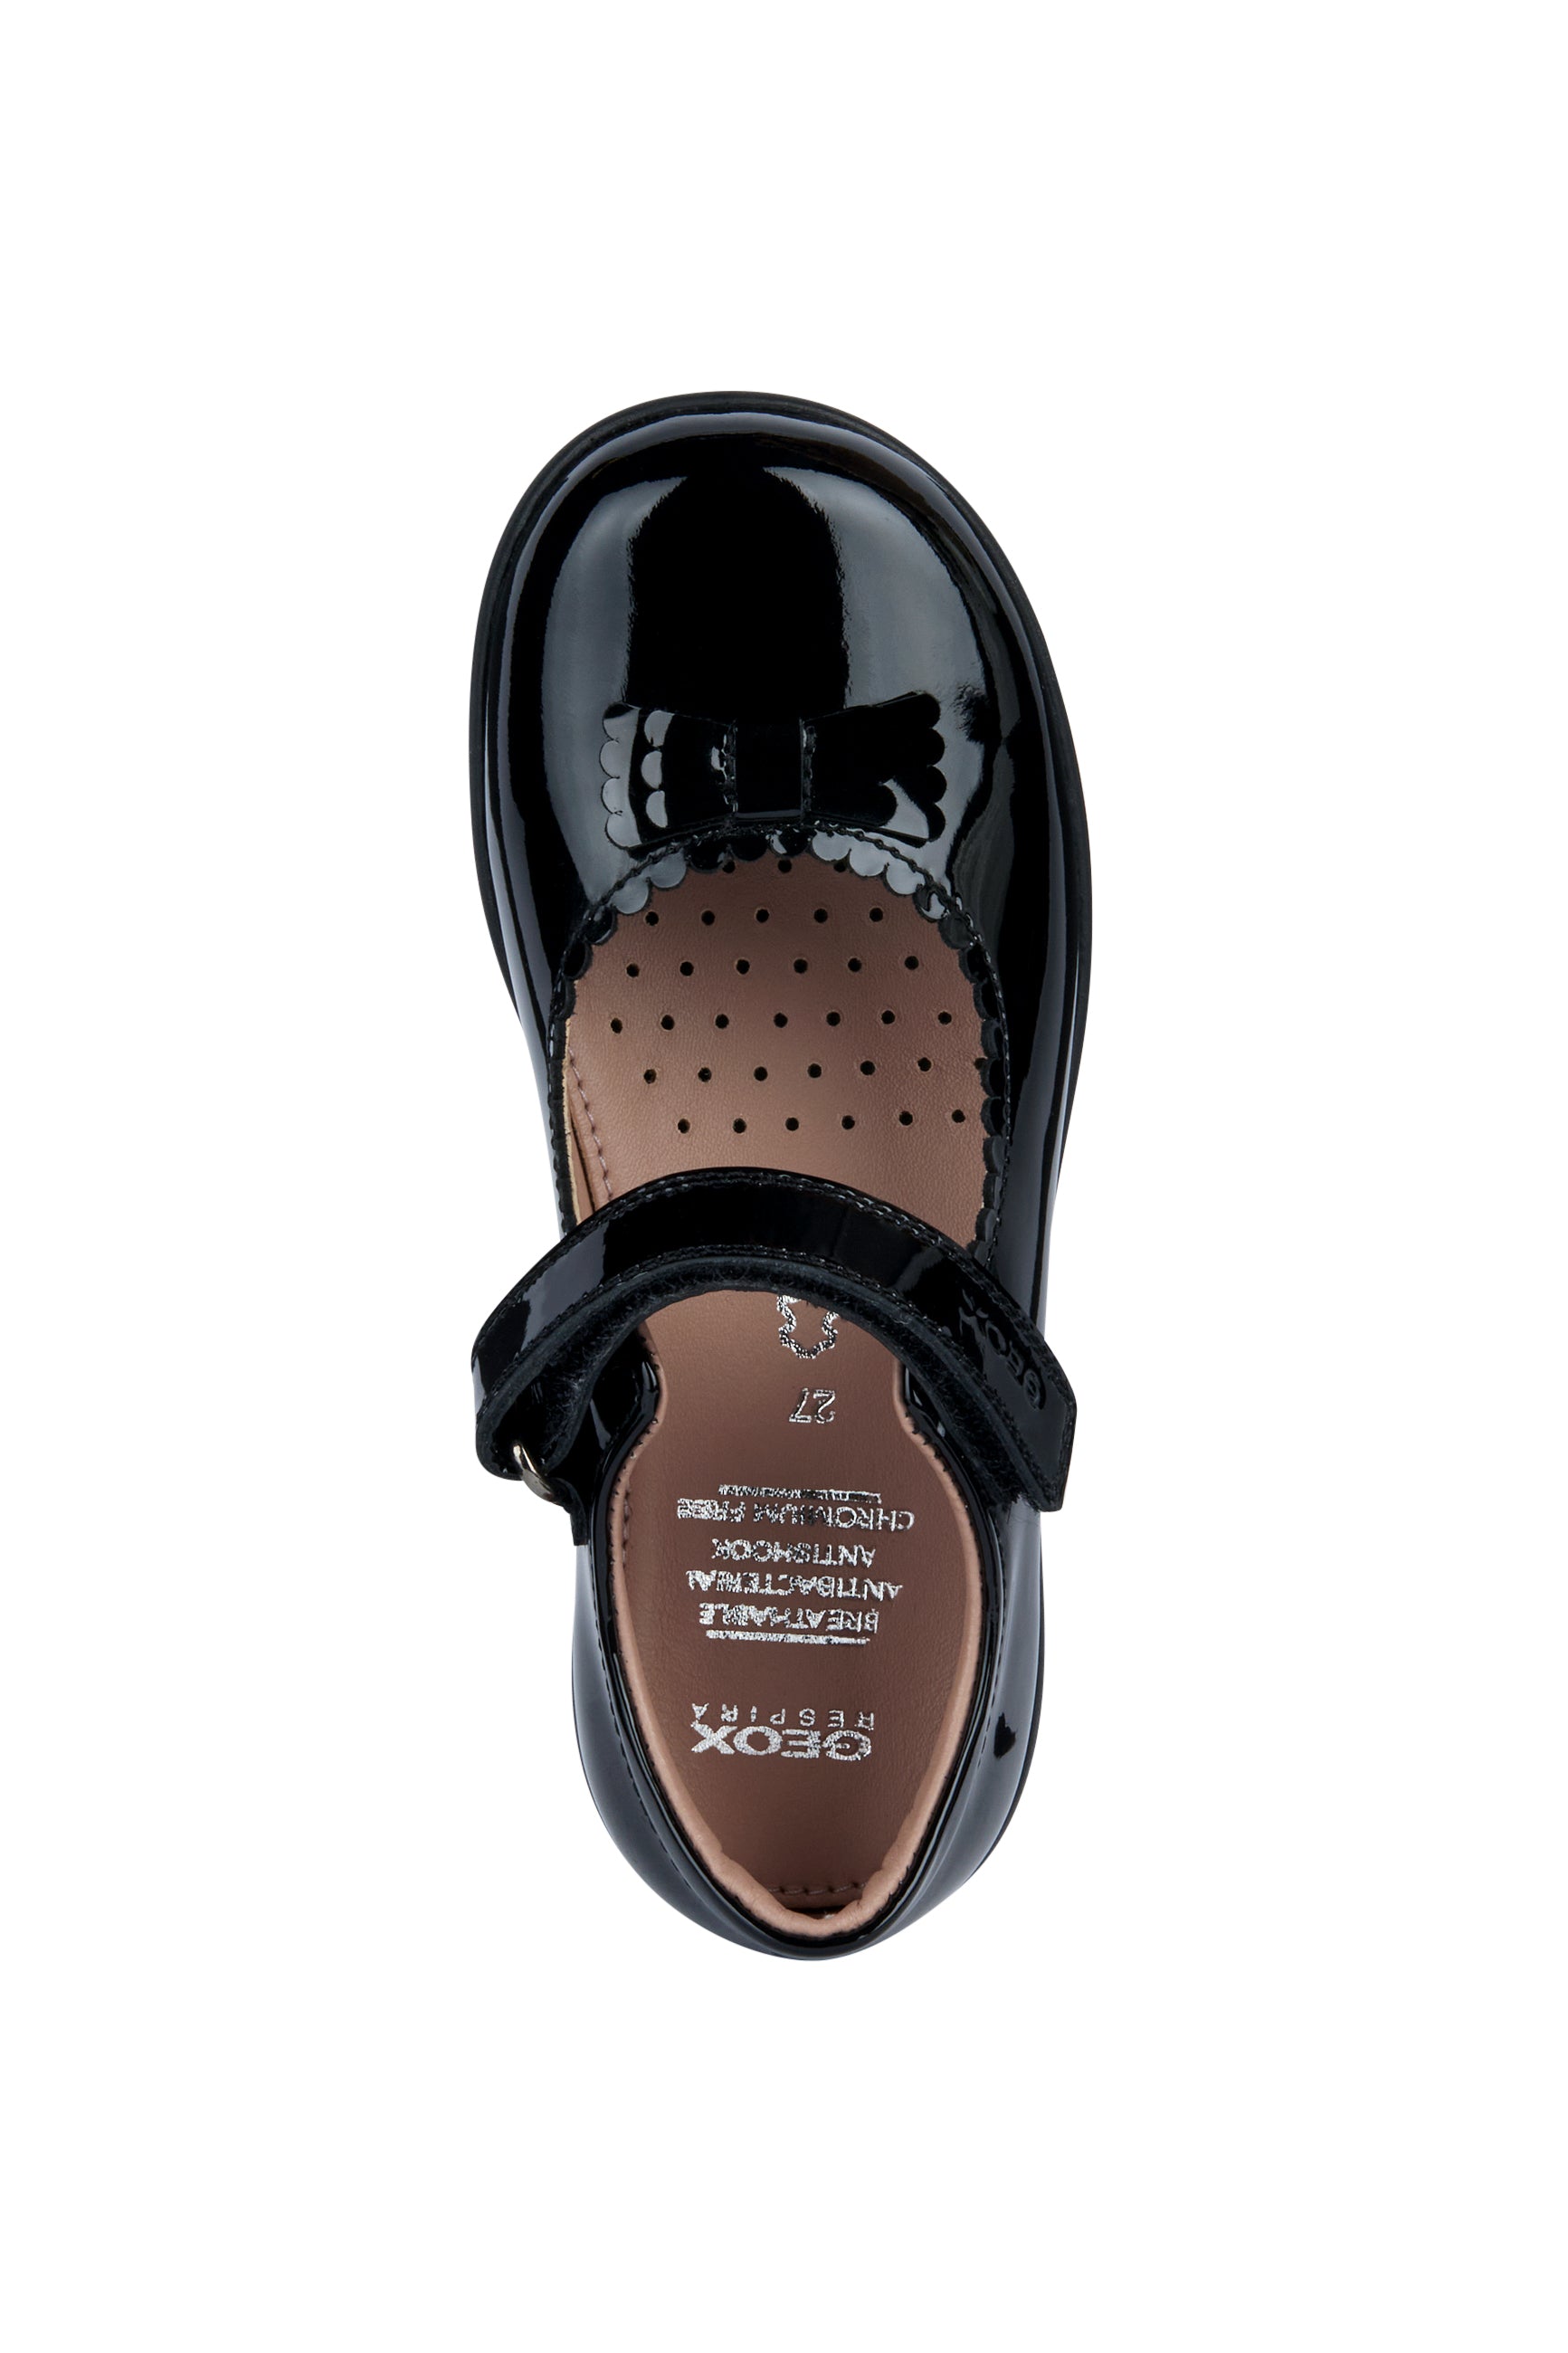 A girls school shoe by Geox, style Naimara in black patent with a velcro strap. Above view.